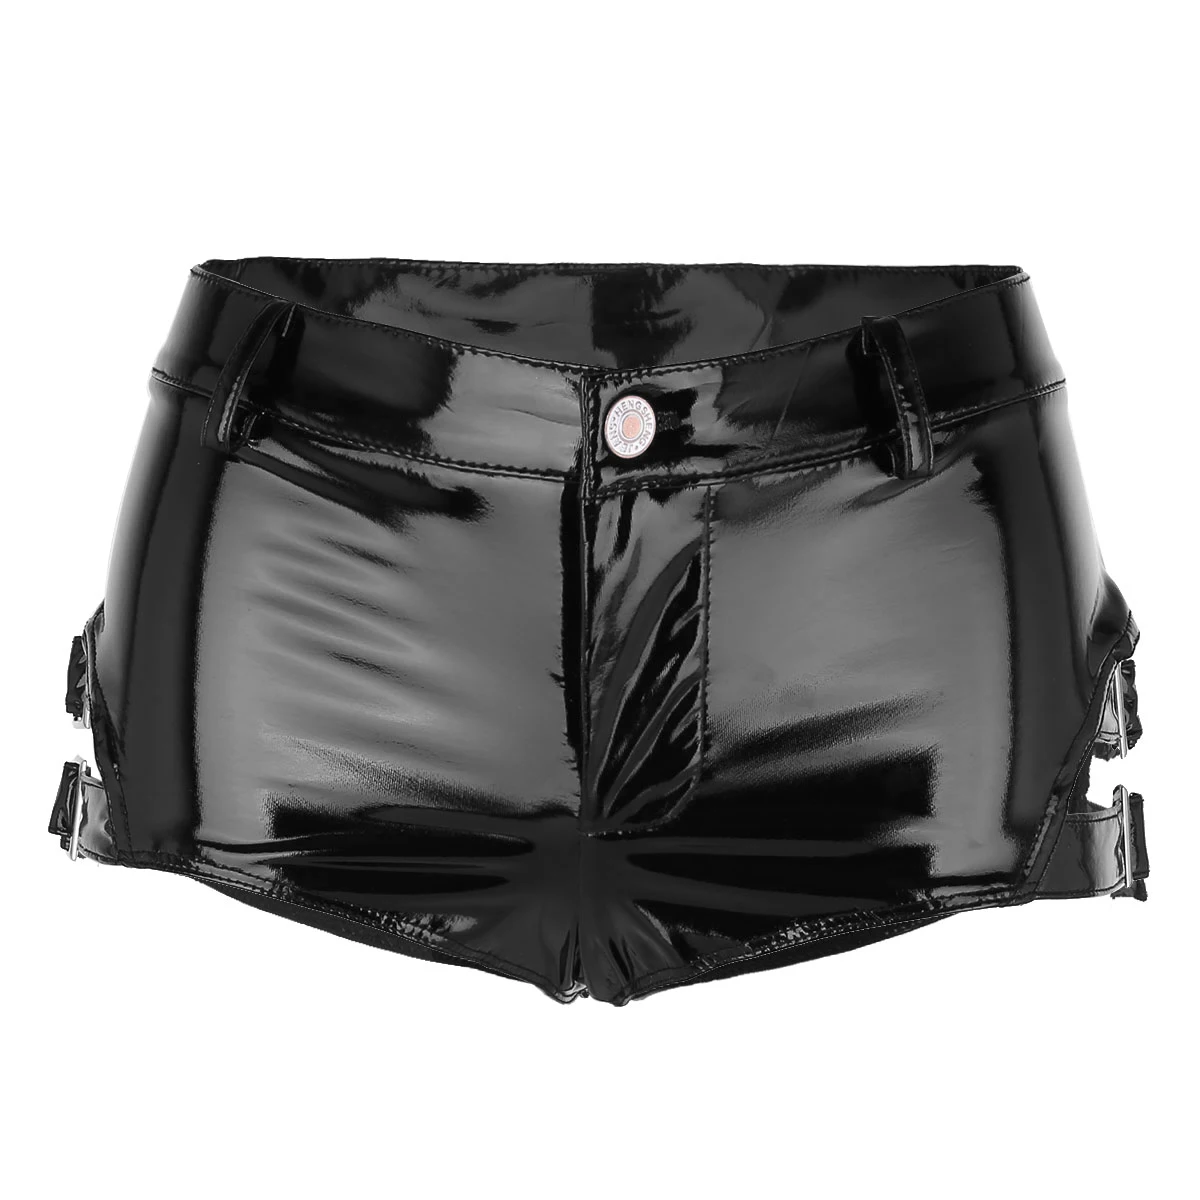 

iEFiEL Fashion Women Female Lingerie Wet Look Patent Leather Low Rise Clubwear Mini Shorts Dance Hot Pants with Buckles Boxer